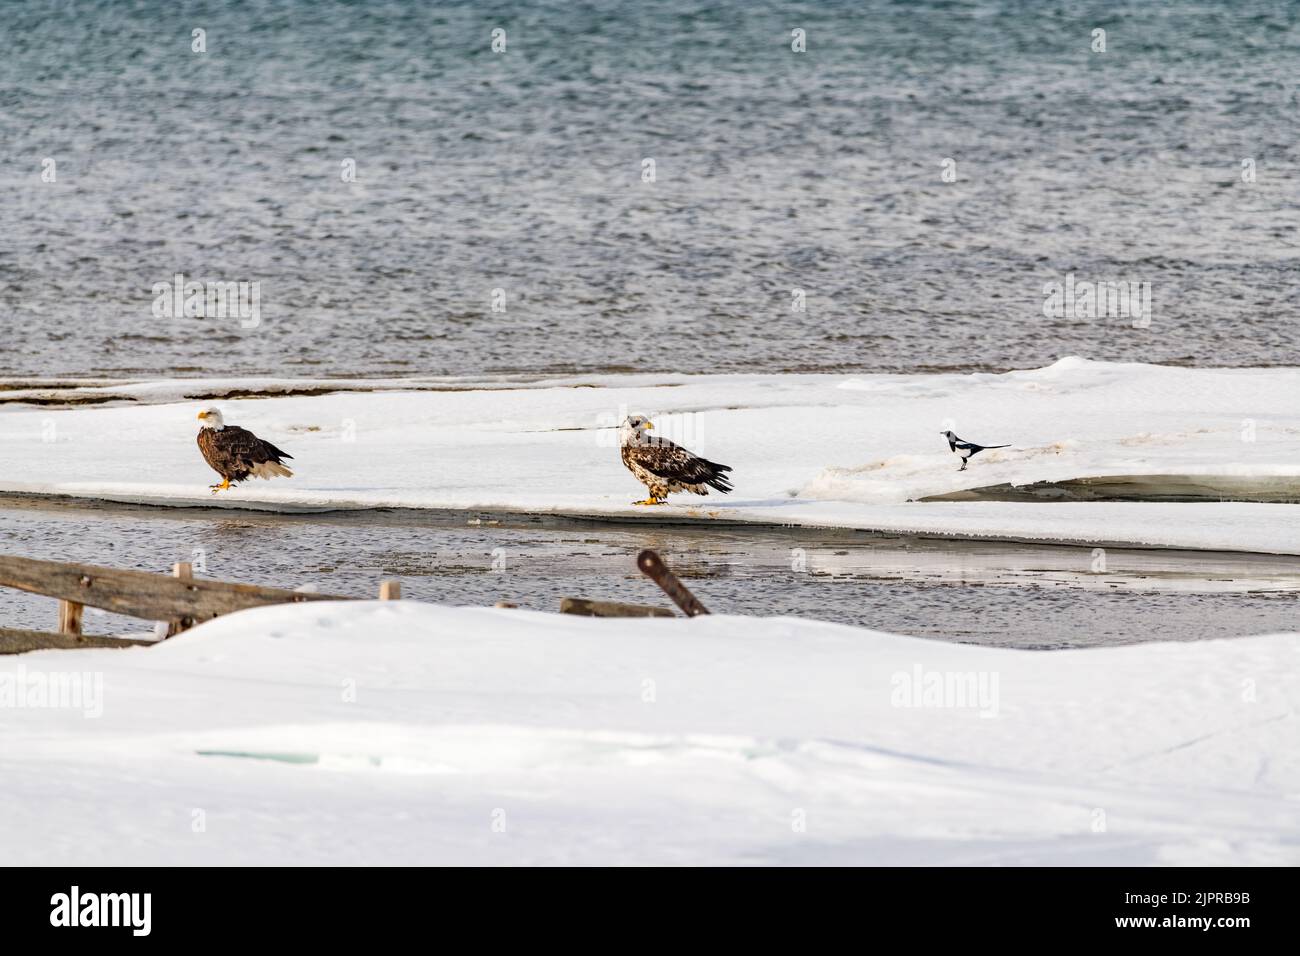 Two bald eagles and a magpie seen standing on a frozen ice edge in northern Canada Stock Photo